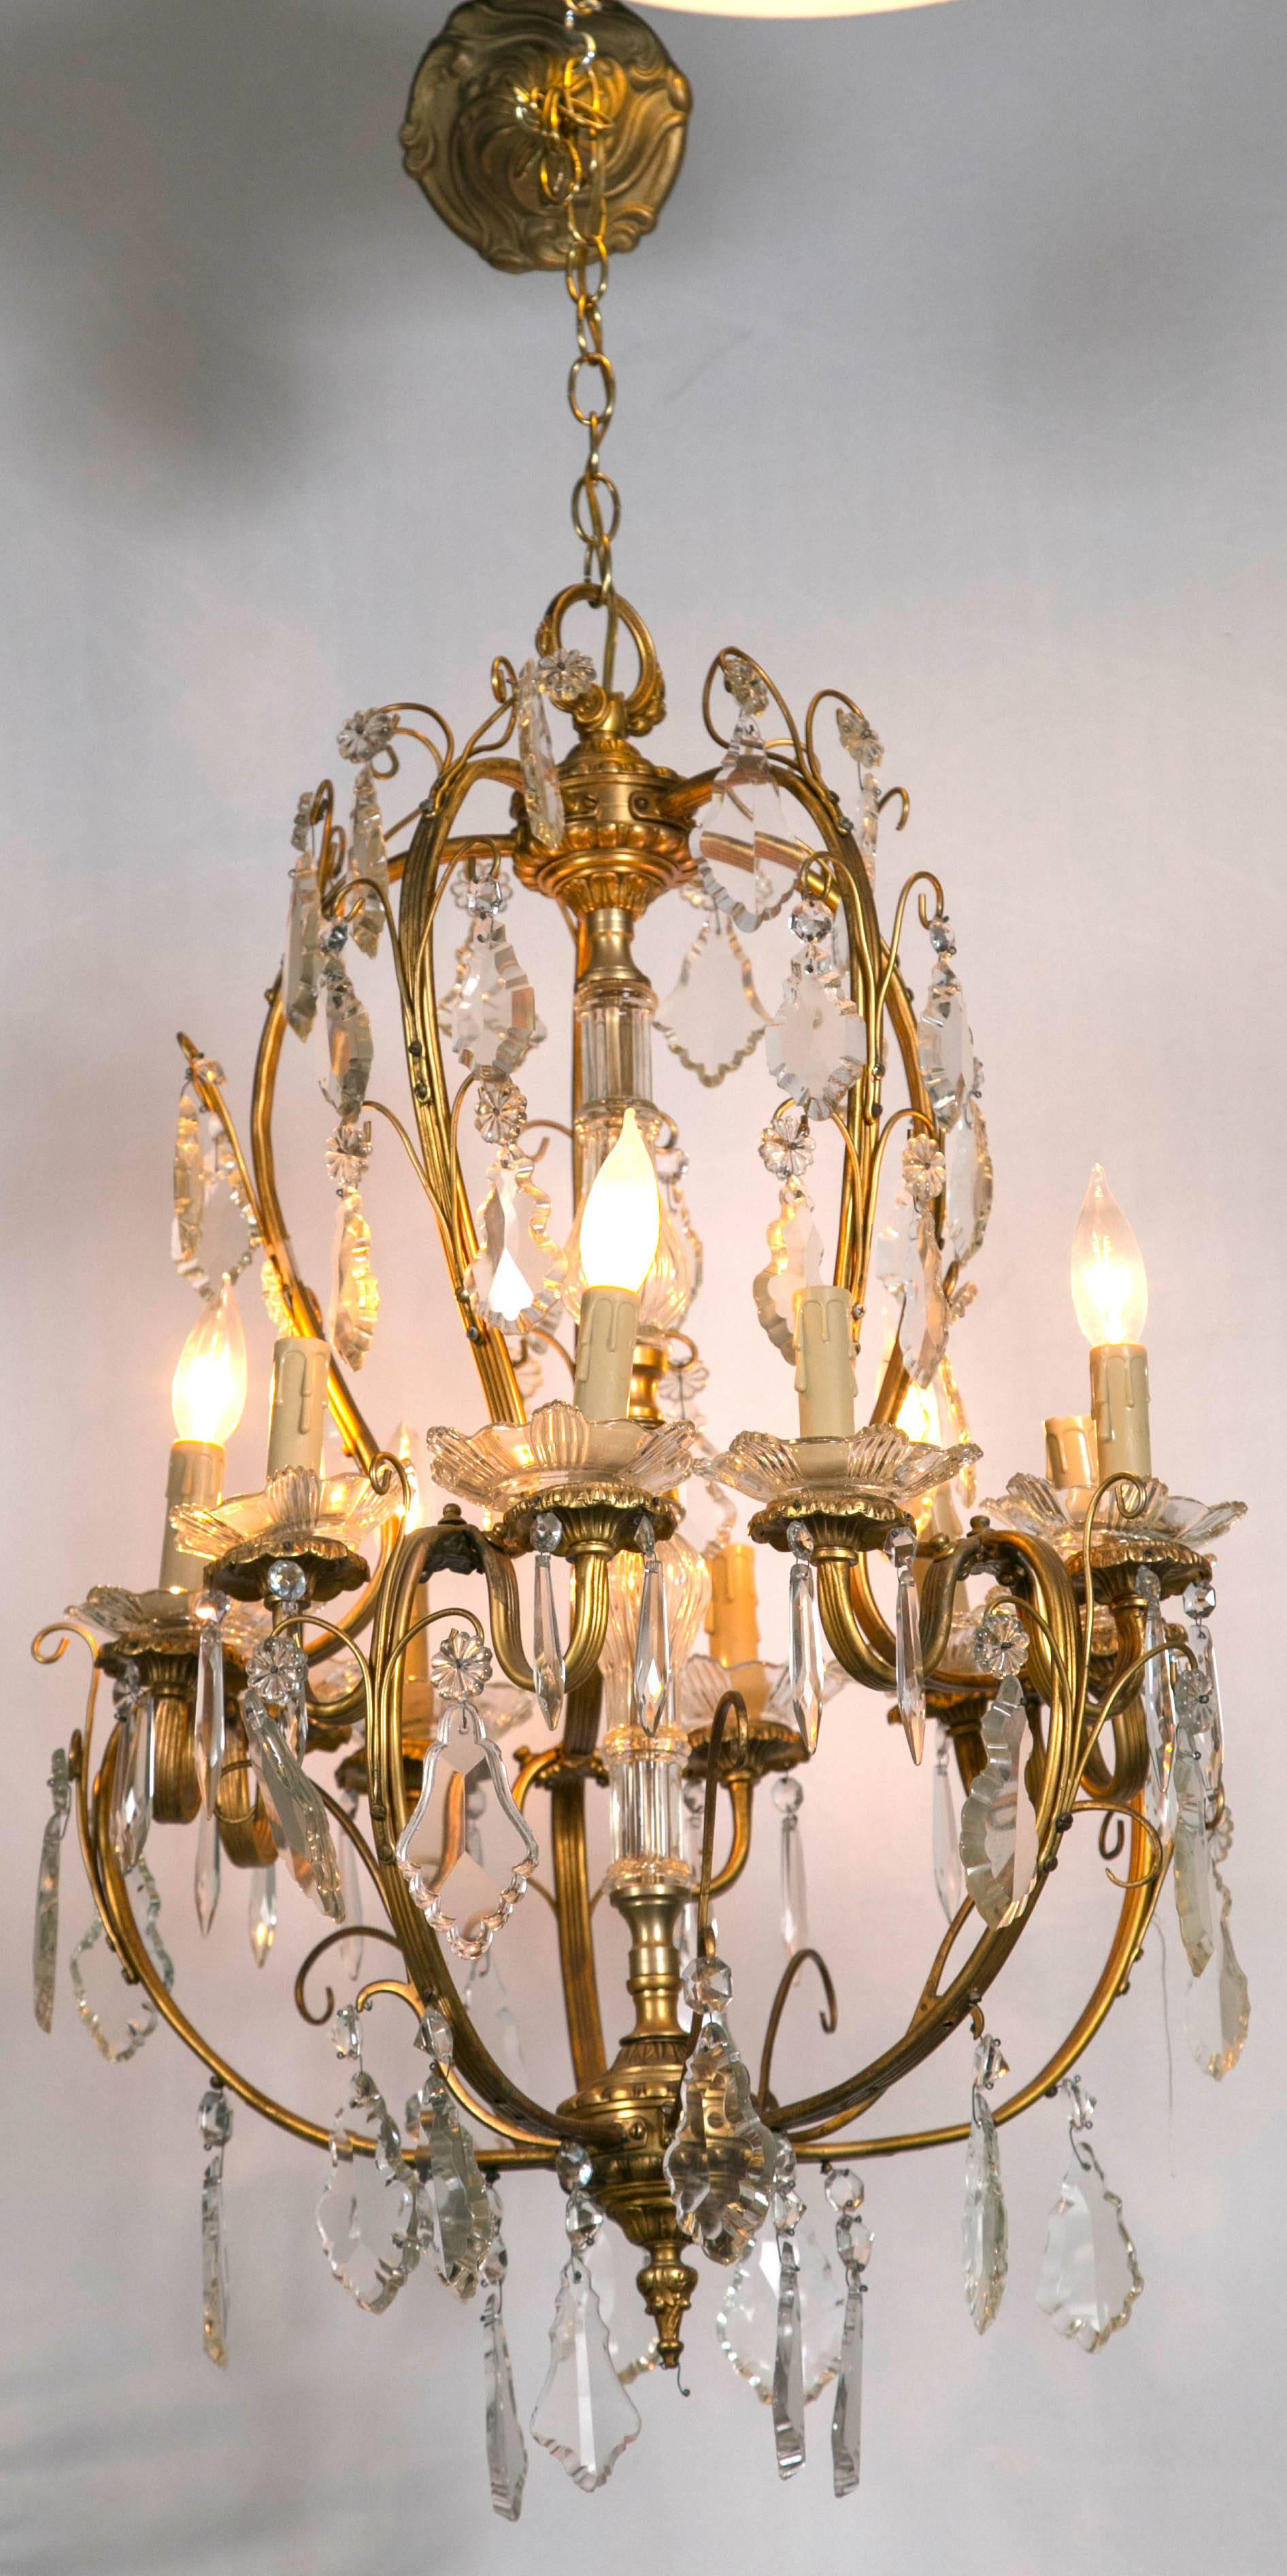 A fine vintage French bronze and crystal chandelier. Having a central glass column with all-over swag and flowing bronze arms this Louis XVI style chandelier would look fantastic in any dining room, hallway or the like. The crystal bobeches under